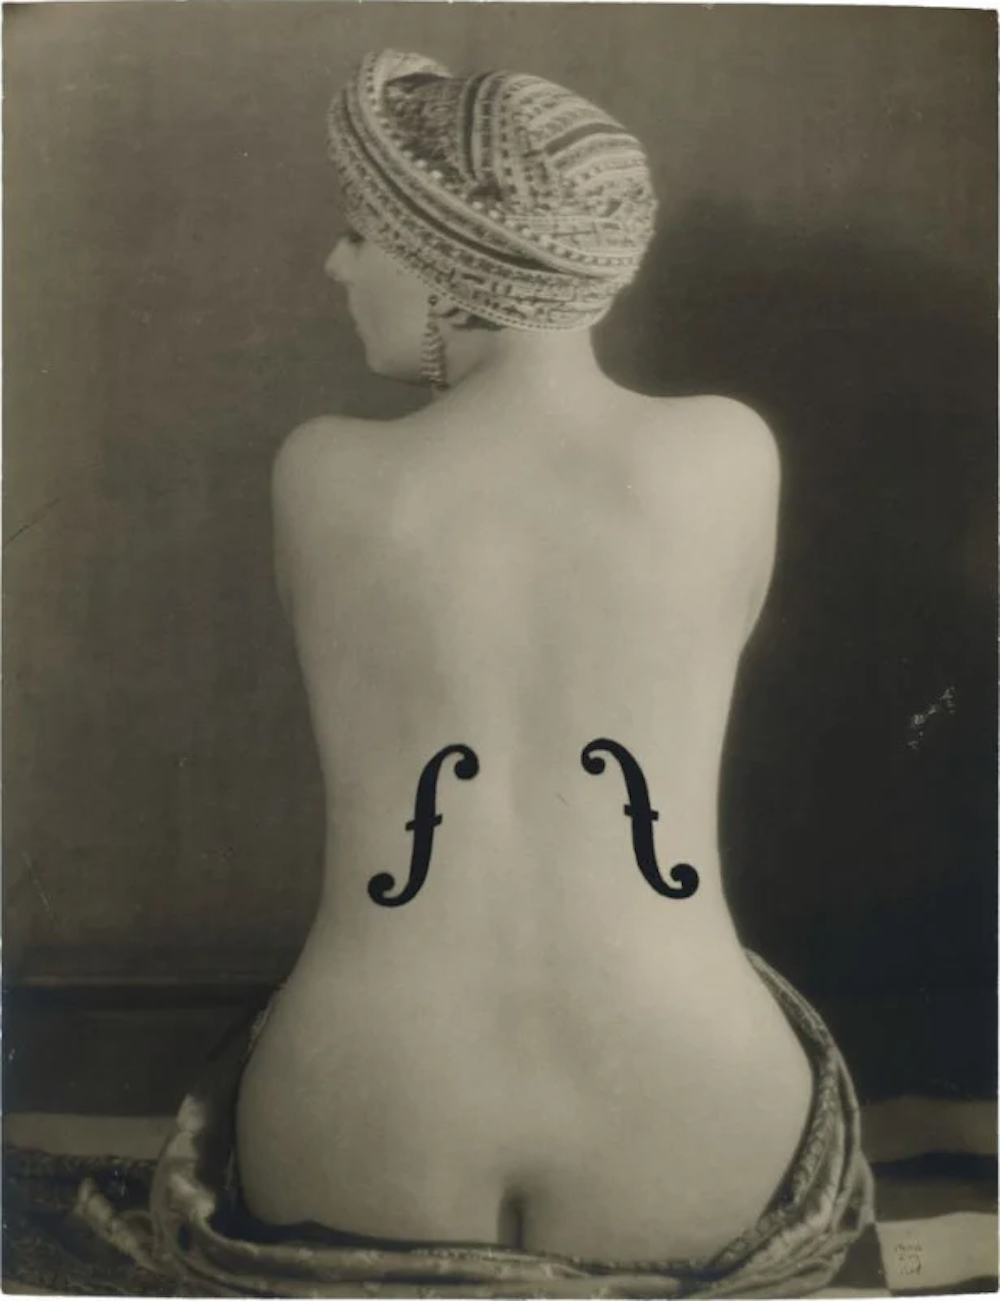 The full frame of Man Ray's Le Violon d'Ingres surreal photographic artwork